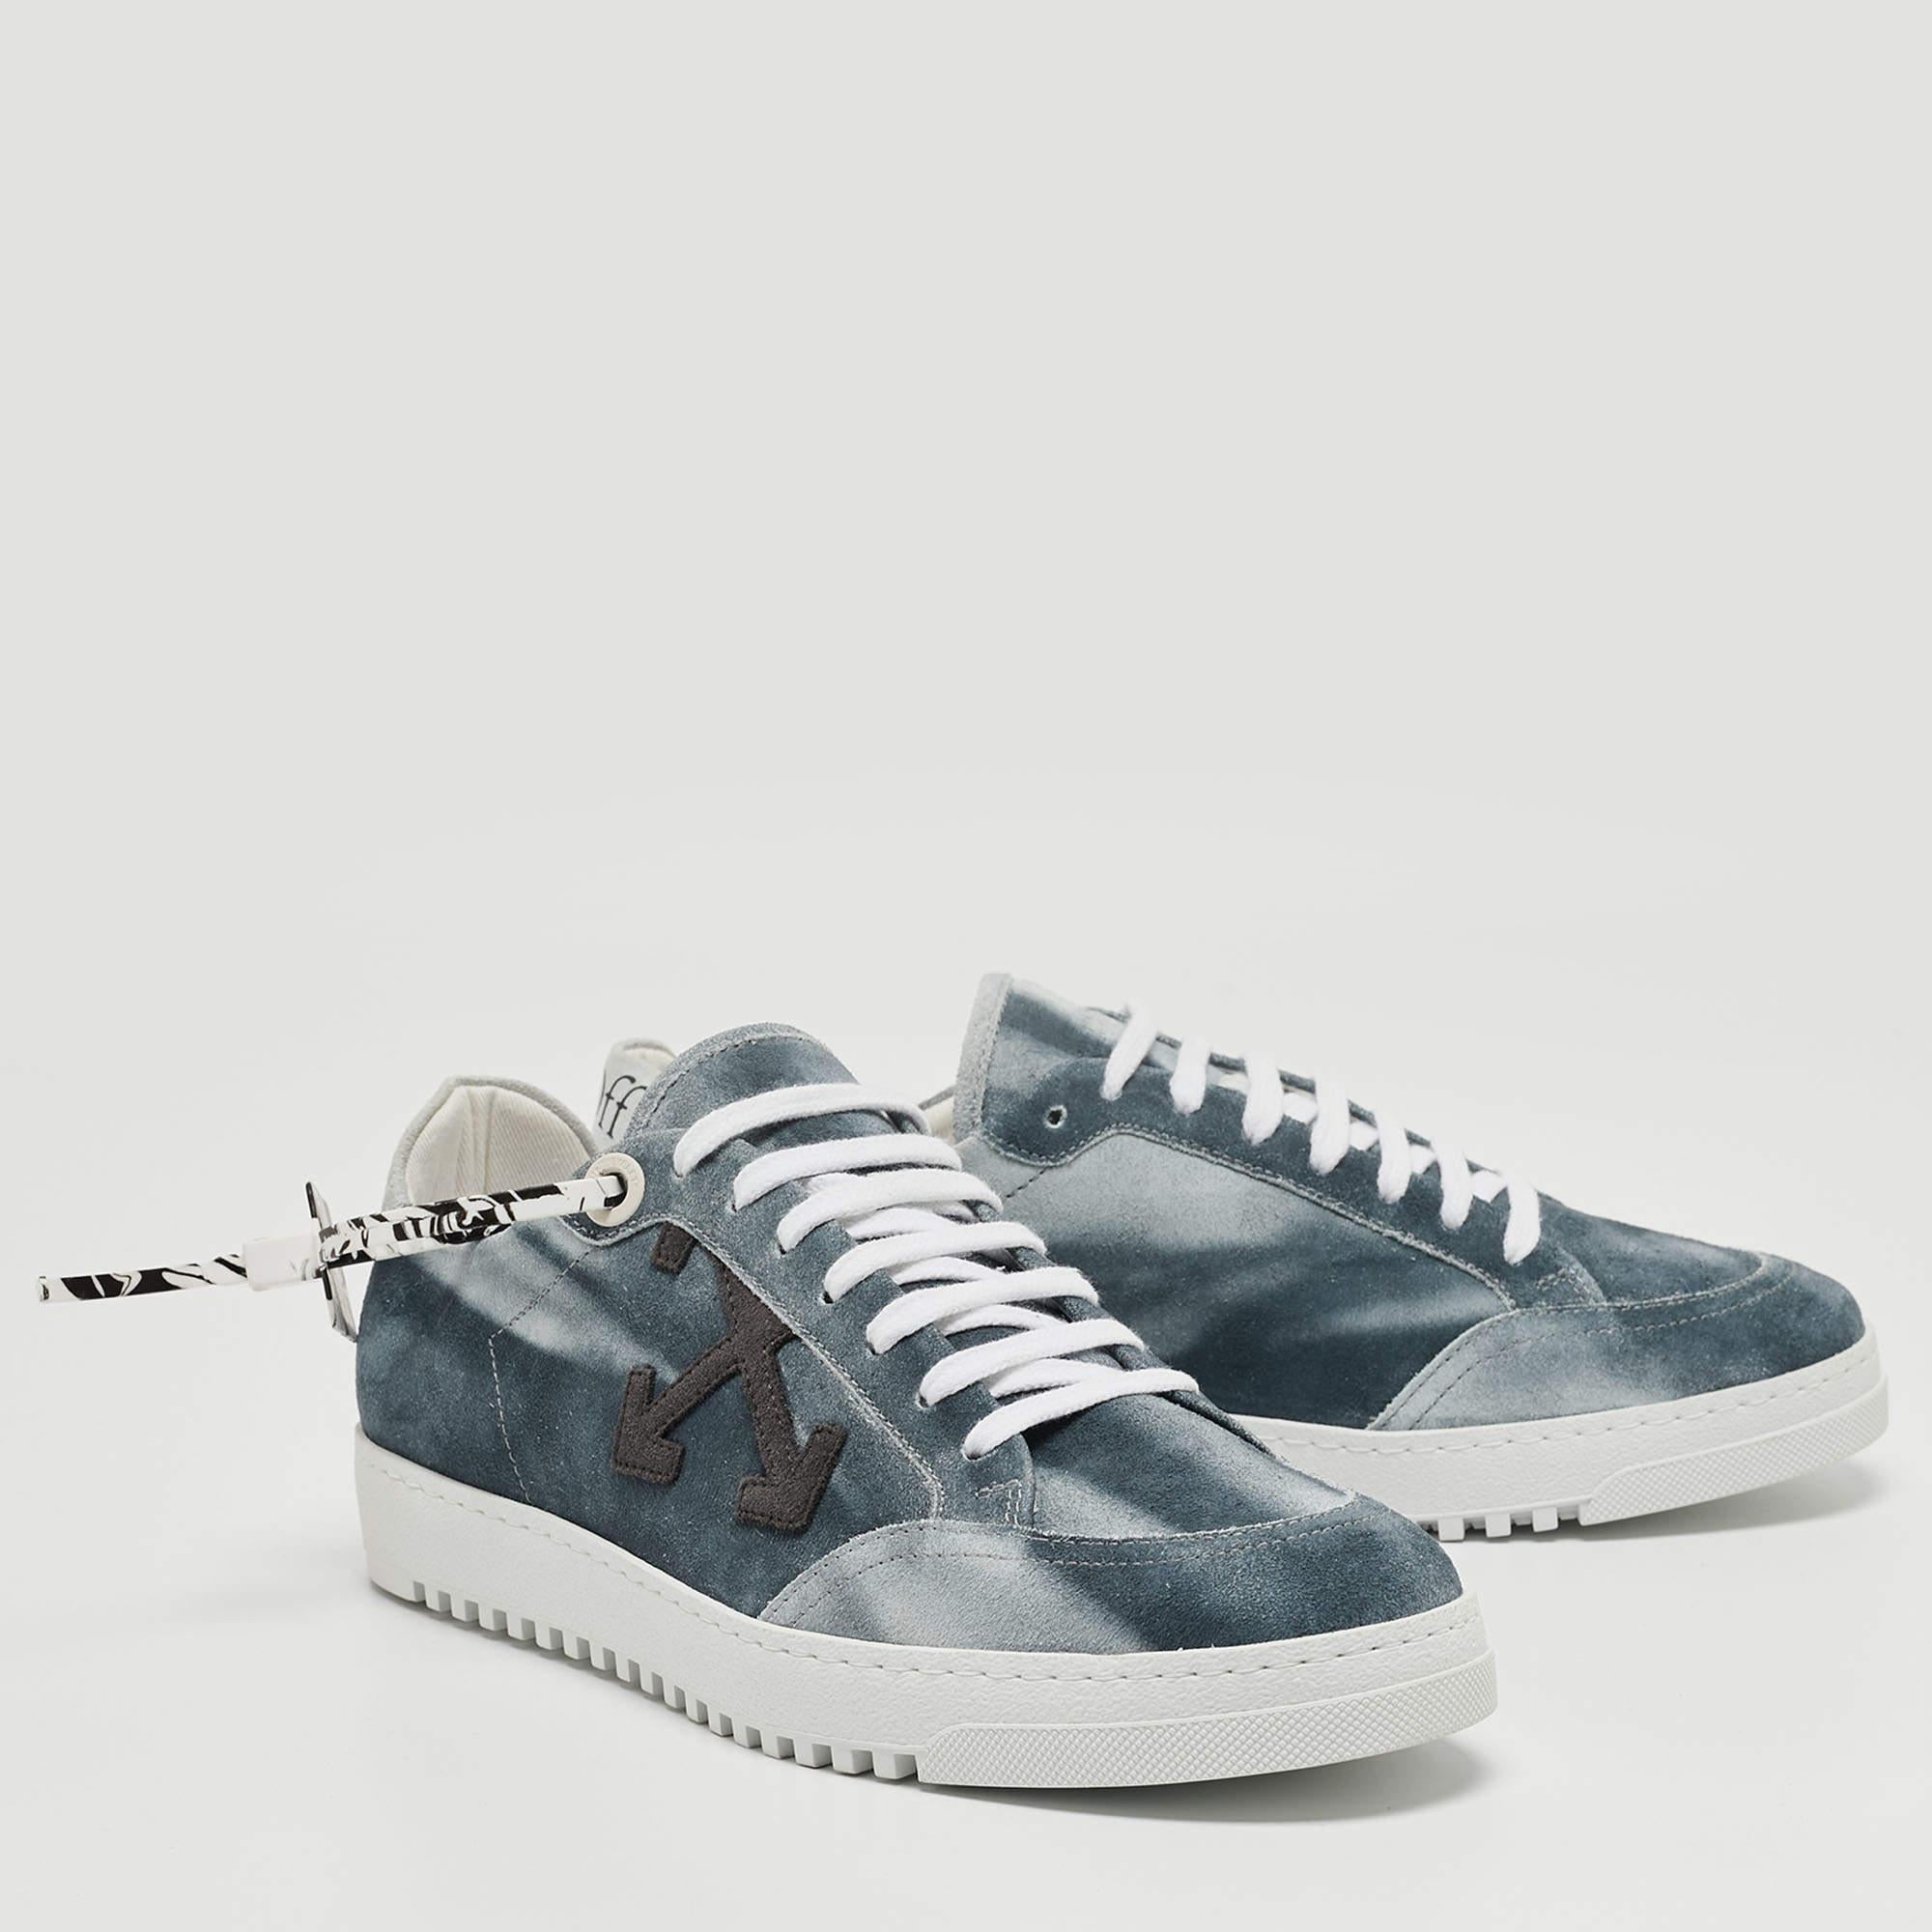 Off-White Blue/Grey Suede 2.0 Low Top Sneakers Size 41 In New Condition For Sale In Dubai, Al Qouz 2